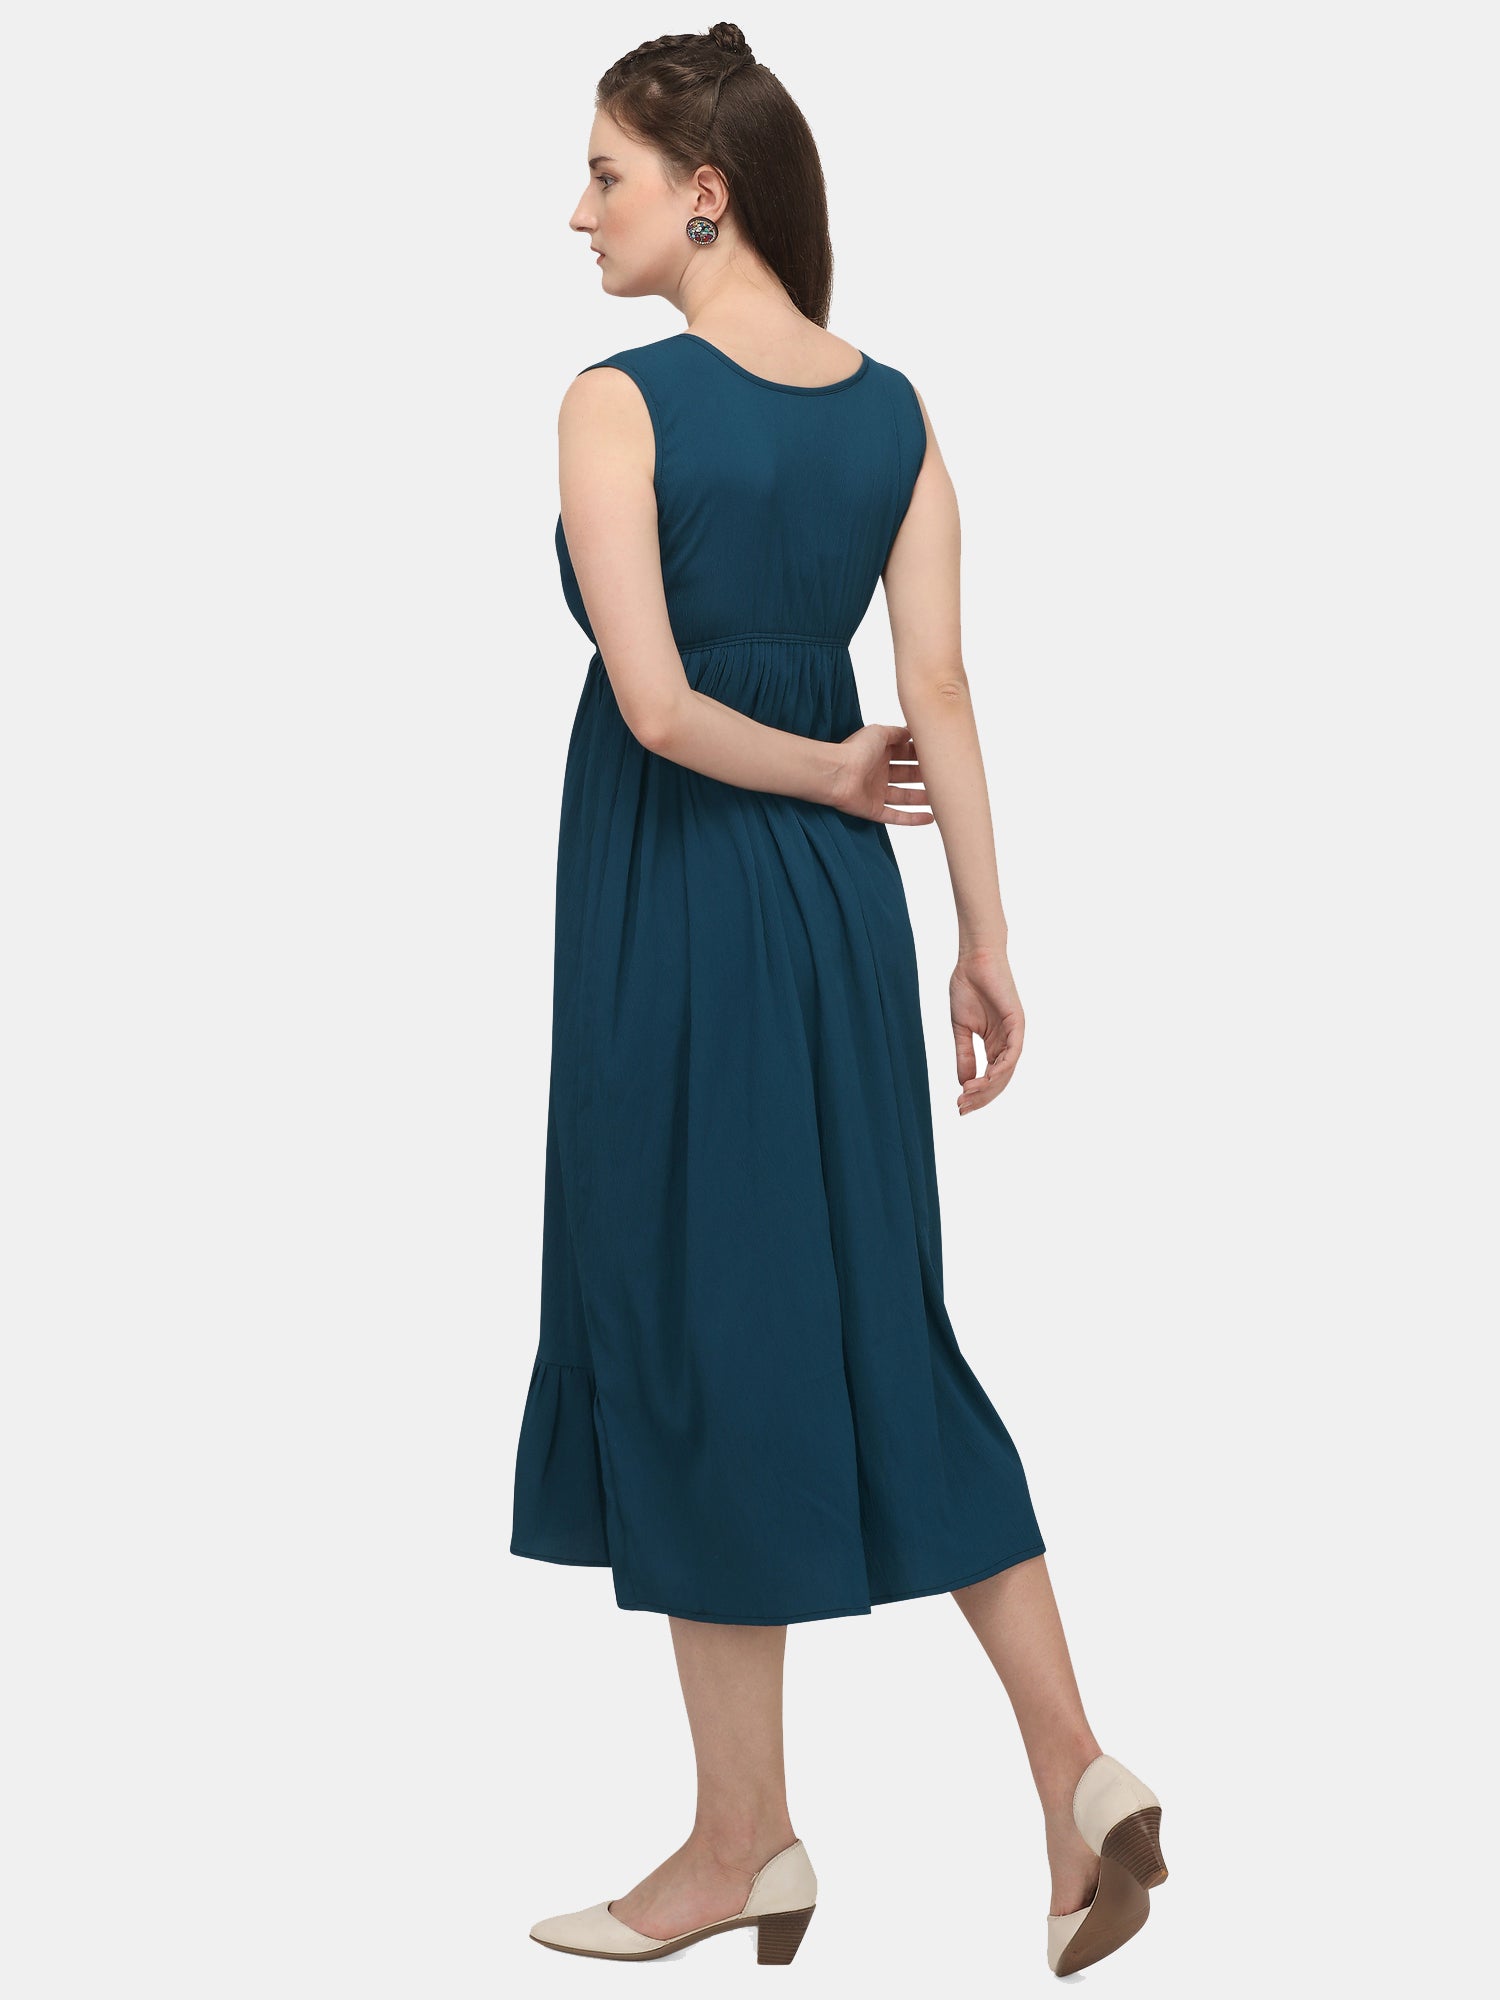 Women's Turquoise Long Ankle Length Frill Dress - MESMORA FASHIONS